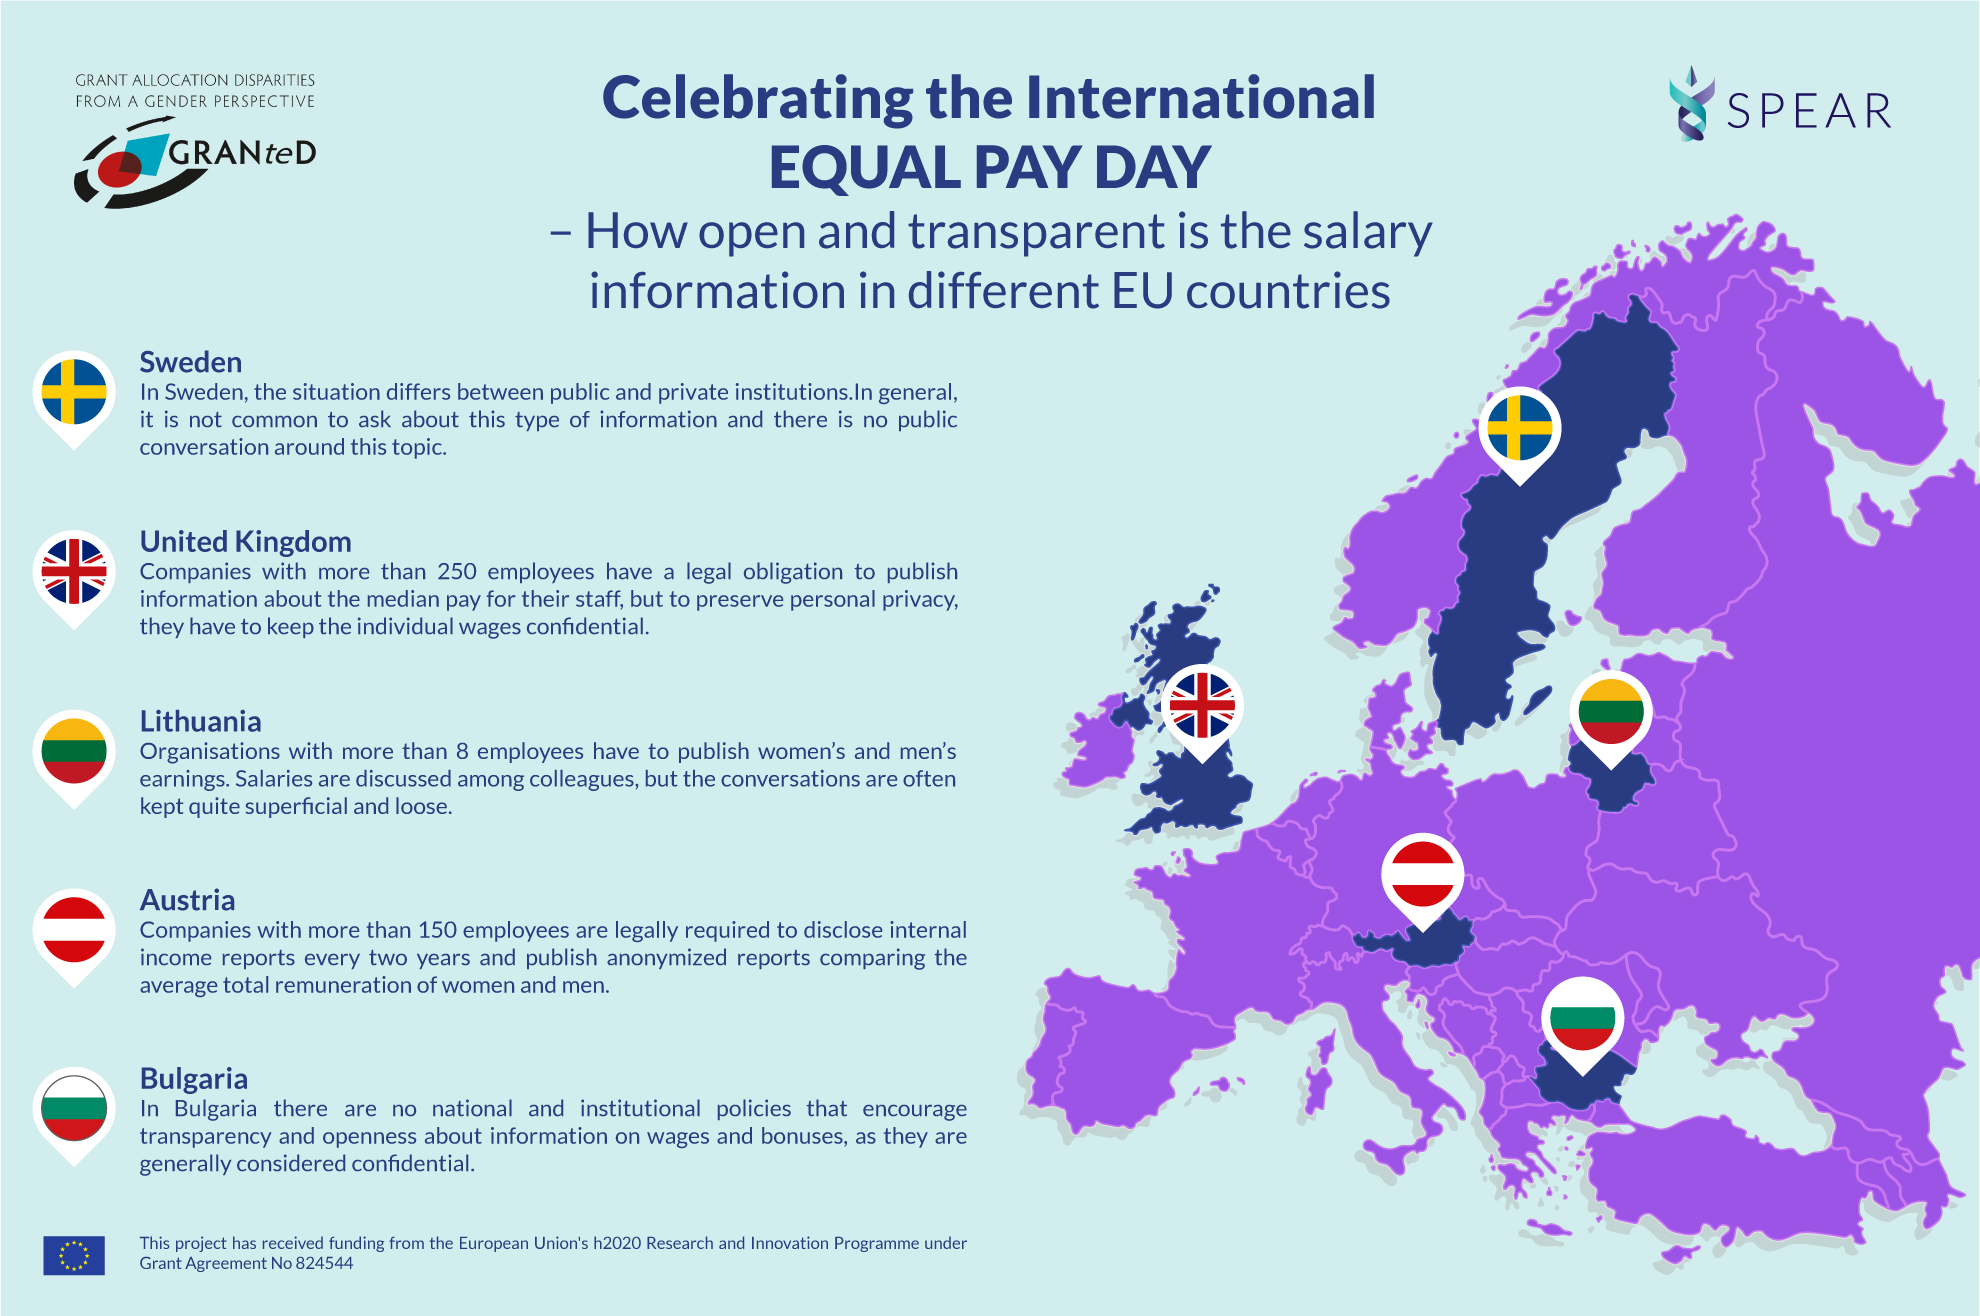 Celebrating the International EQUAL PAY DAY - Let’s be open about our payments in academia